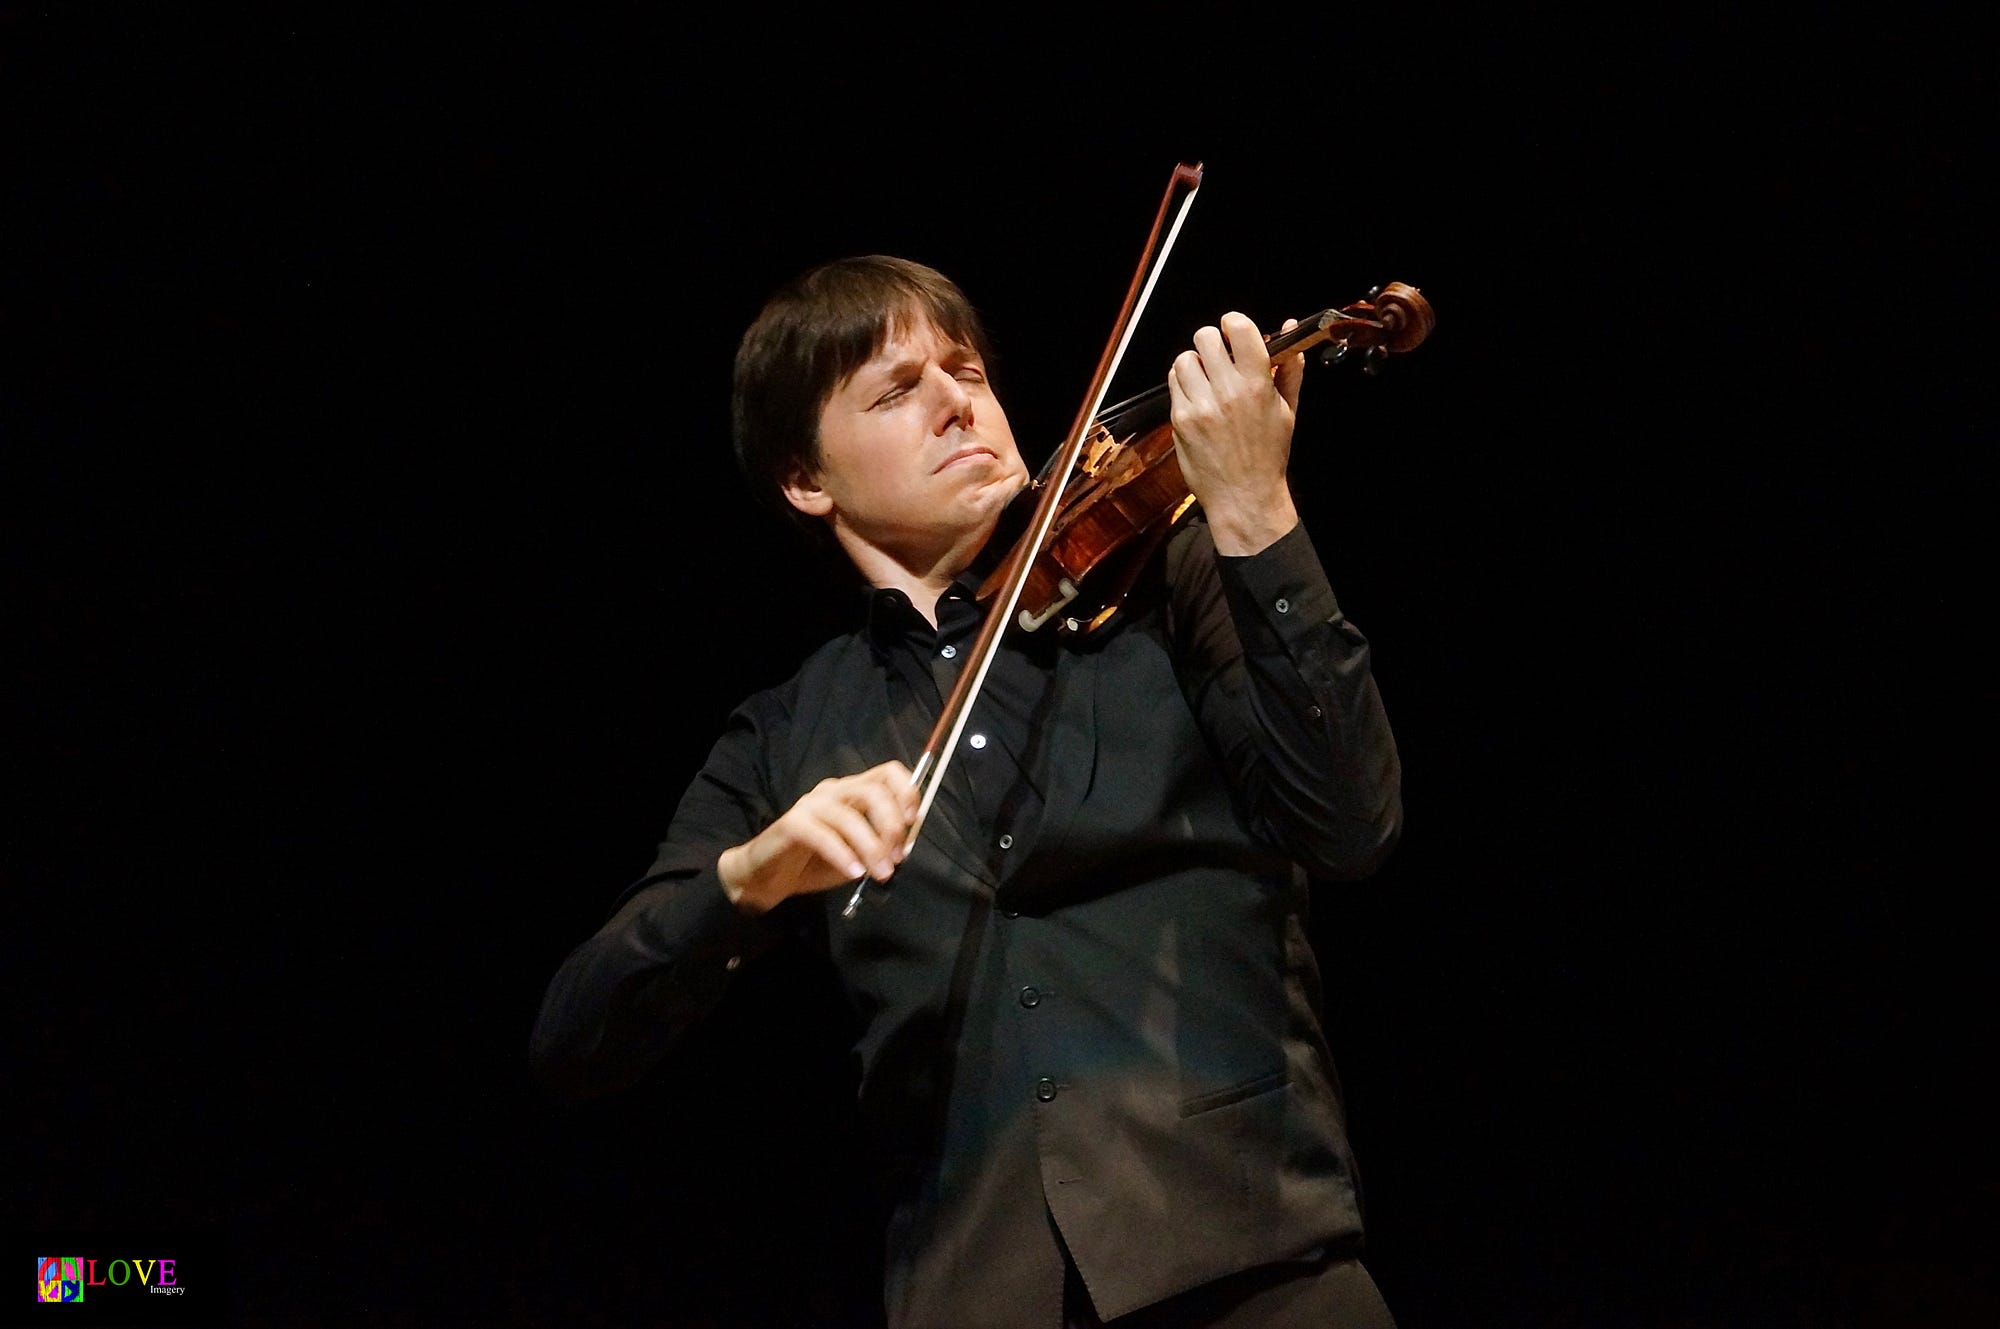 Violinist Joshua Bell LIVE! in “The Concert of a Lifetime